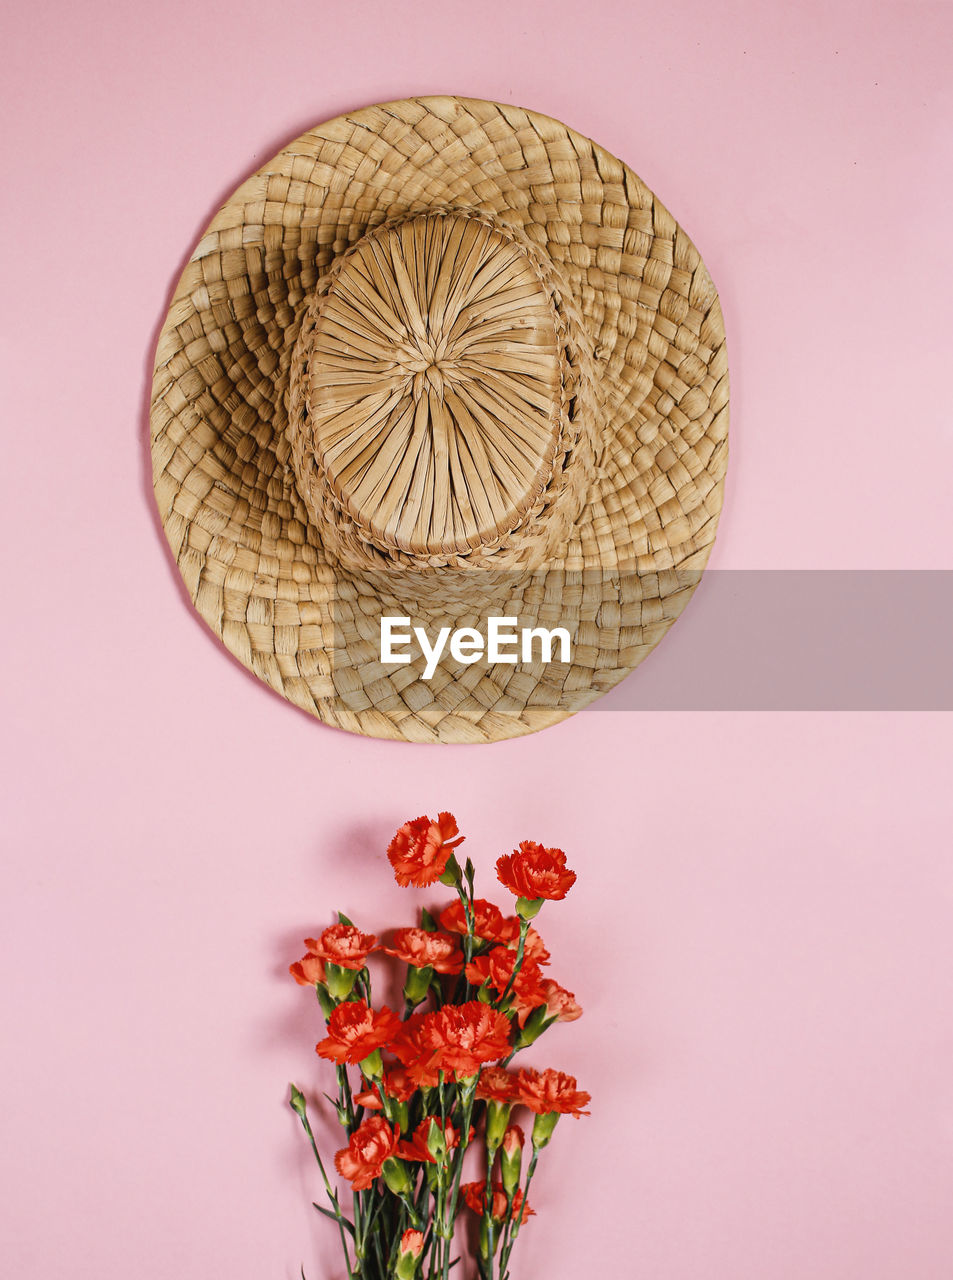 Vintage hat on pink background with flower bouquet